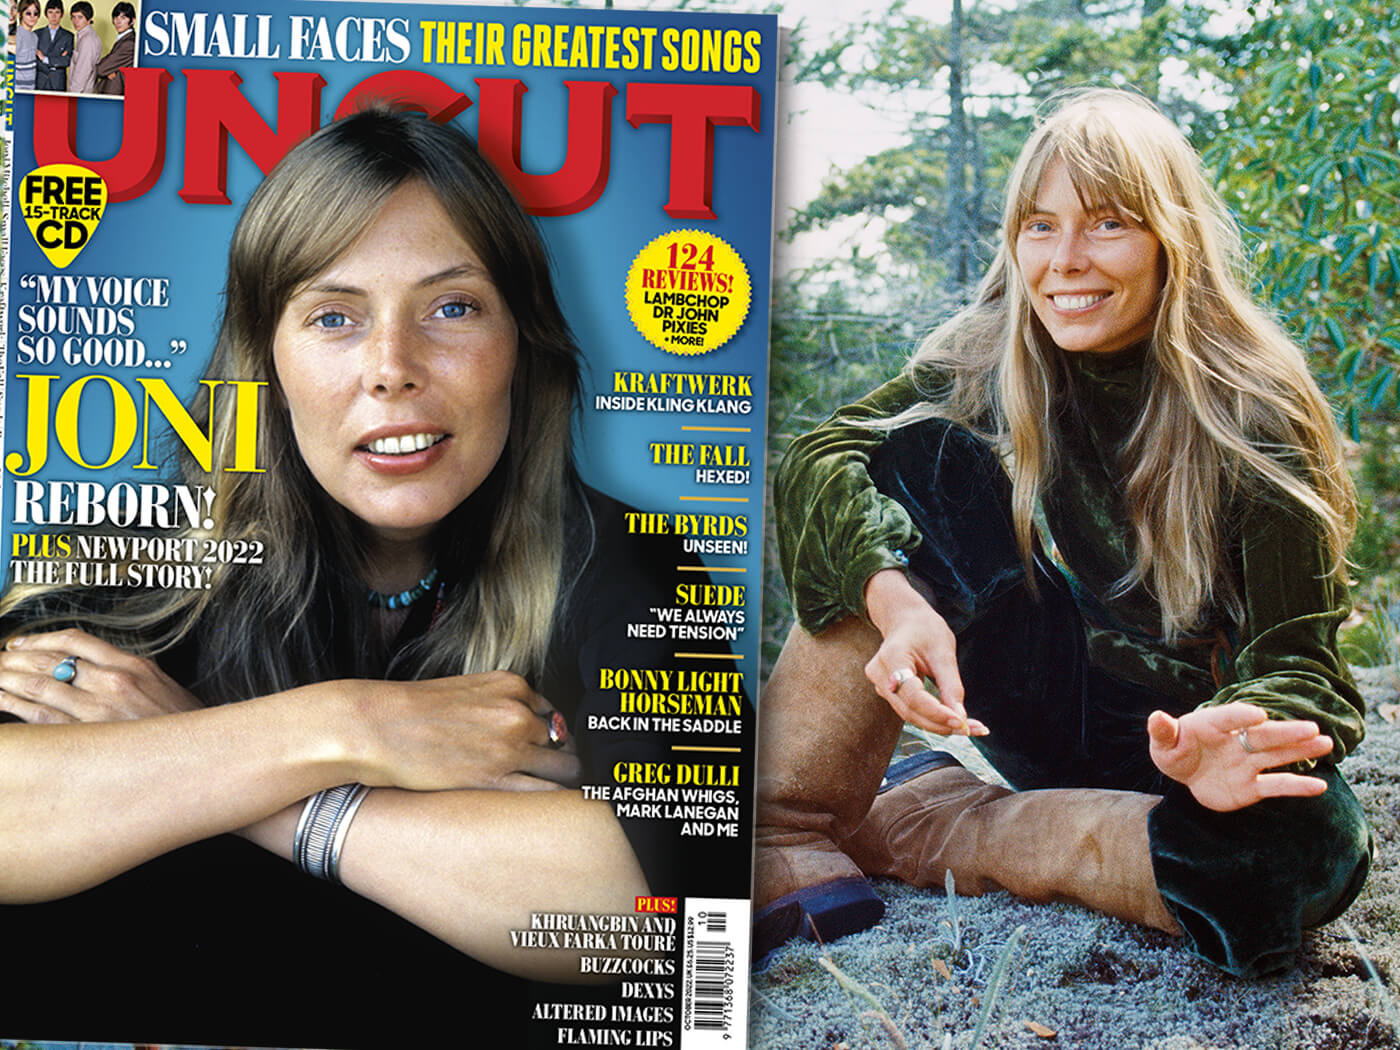 Joni Mitchell: “I can’t believe how good my voice sounds!”